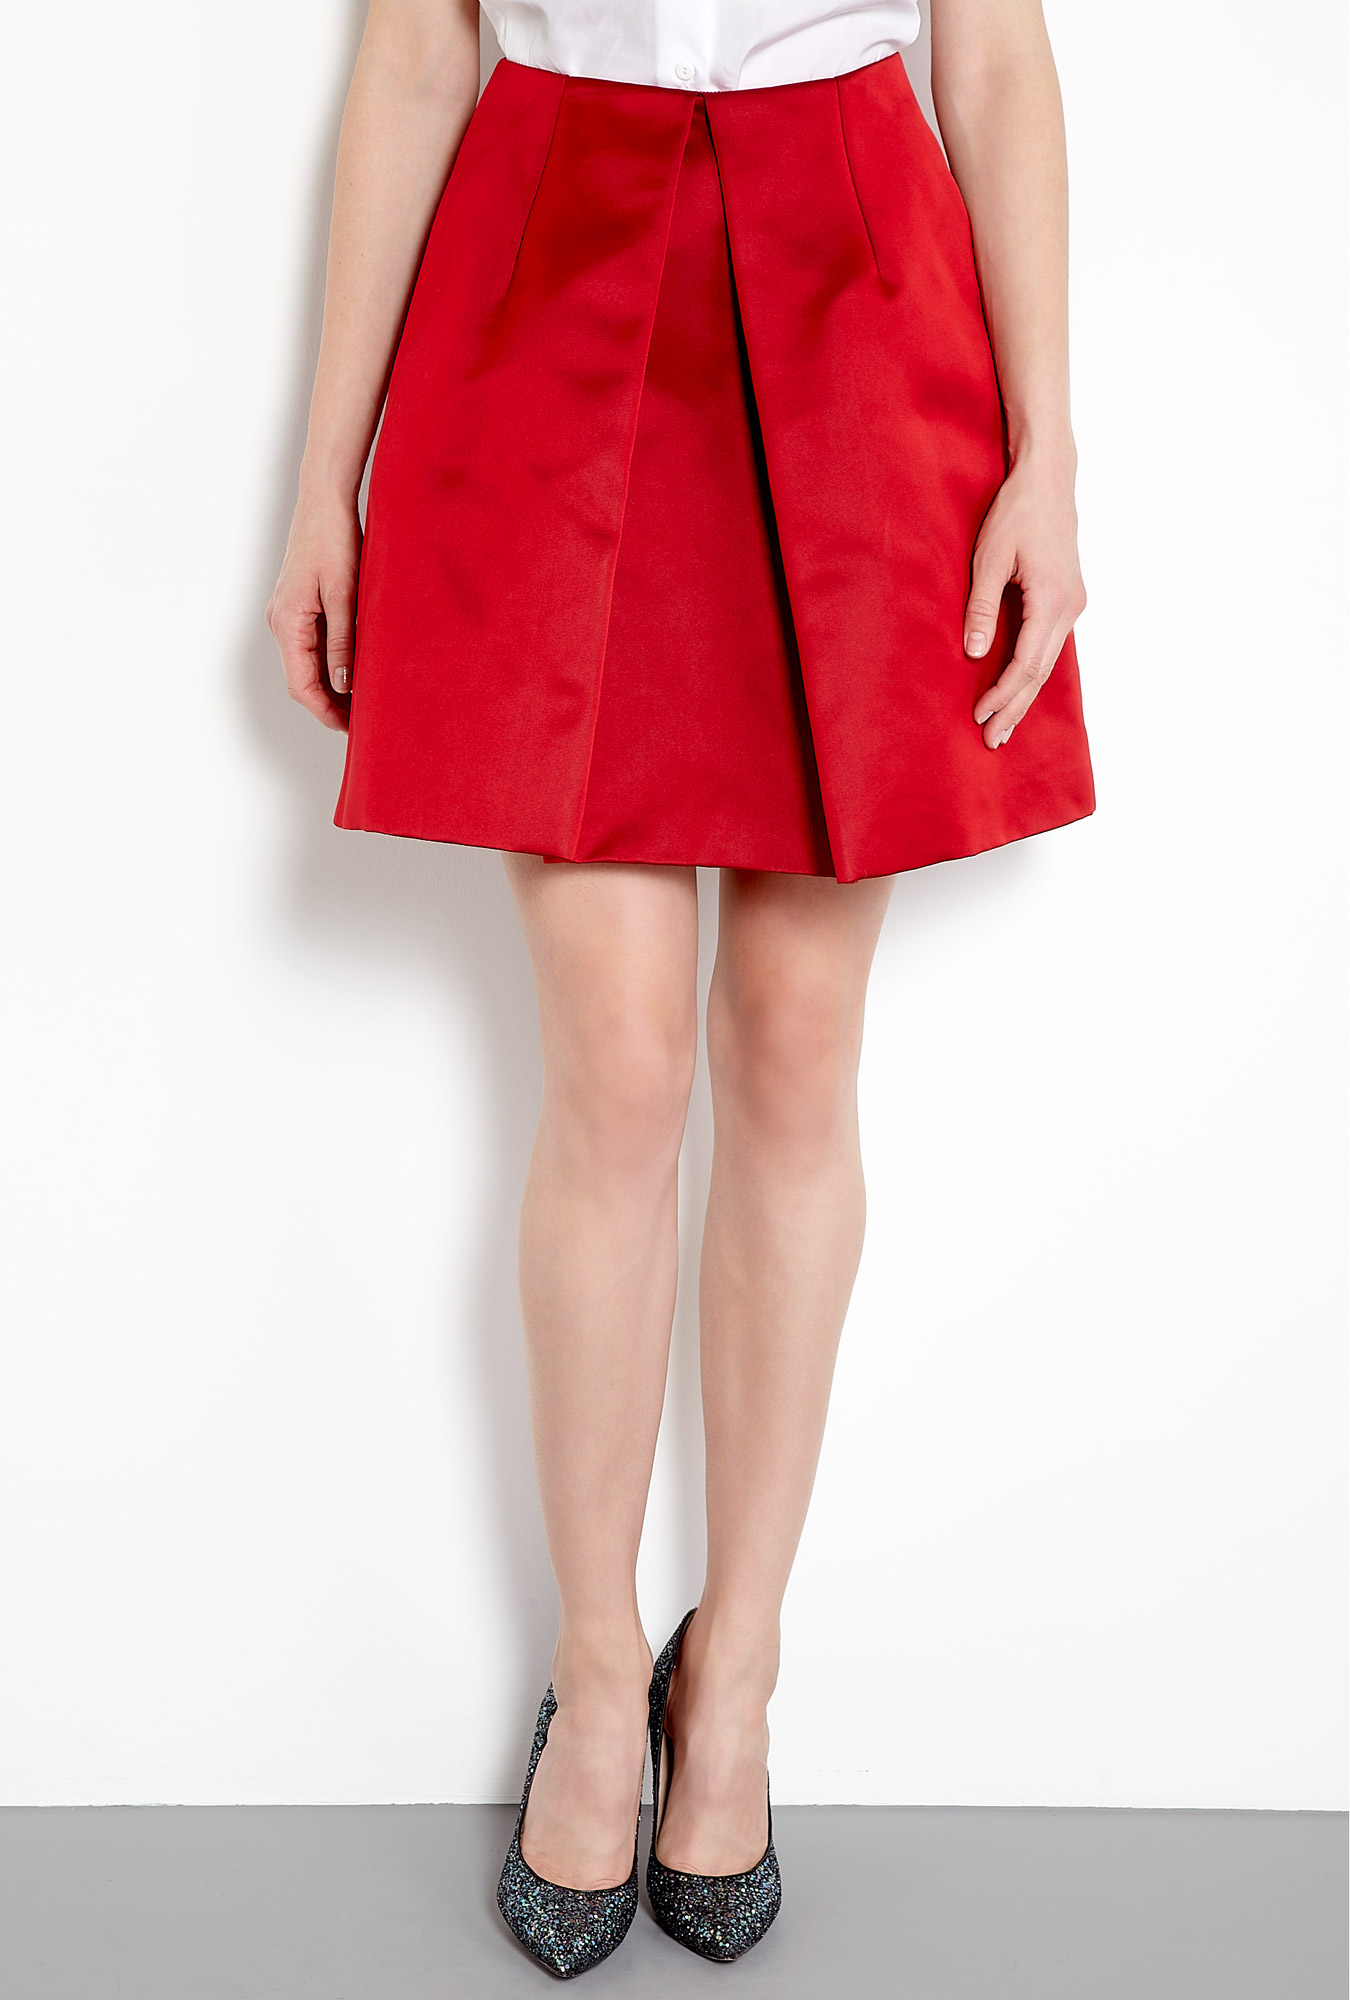 Carven Pleated Satin Skirt in Red | Lyst